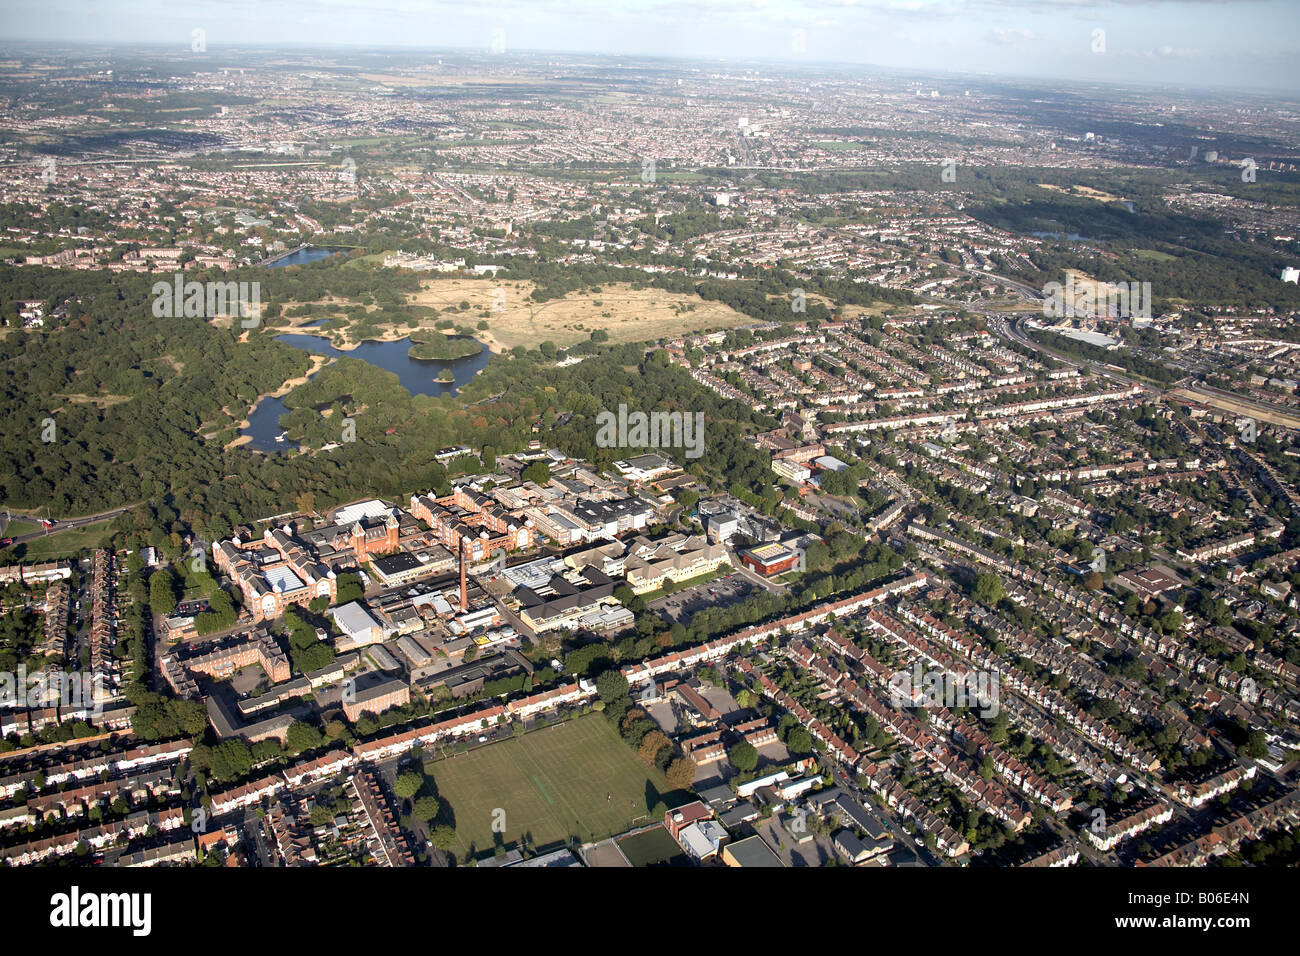 Aerial view north east of Hollow Pond Boating Lake Whipps Cross Hospital London South Bank University suburban housing Wanstead Stock Photo